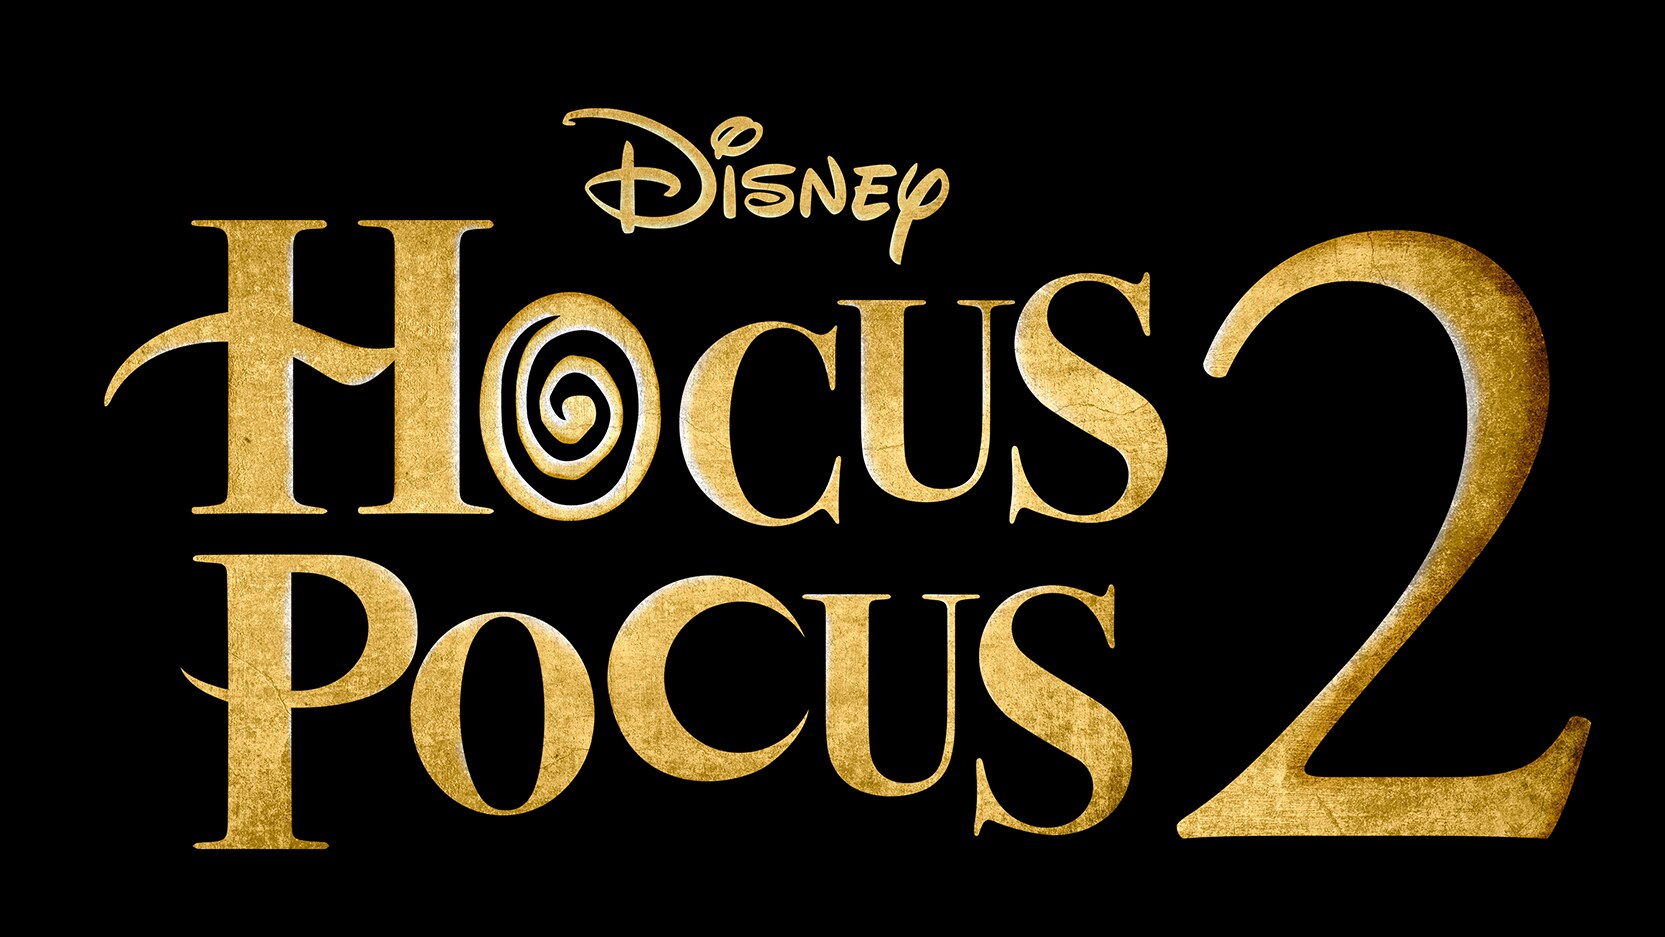 Bette Midler, Sarah Jessica Parker and Kathy Najimy Set to Conjure up More Chills, Laughs and Mayhem in Live-Action Comedy "Hocus Pocus 2" 